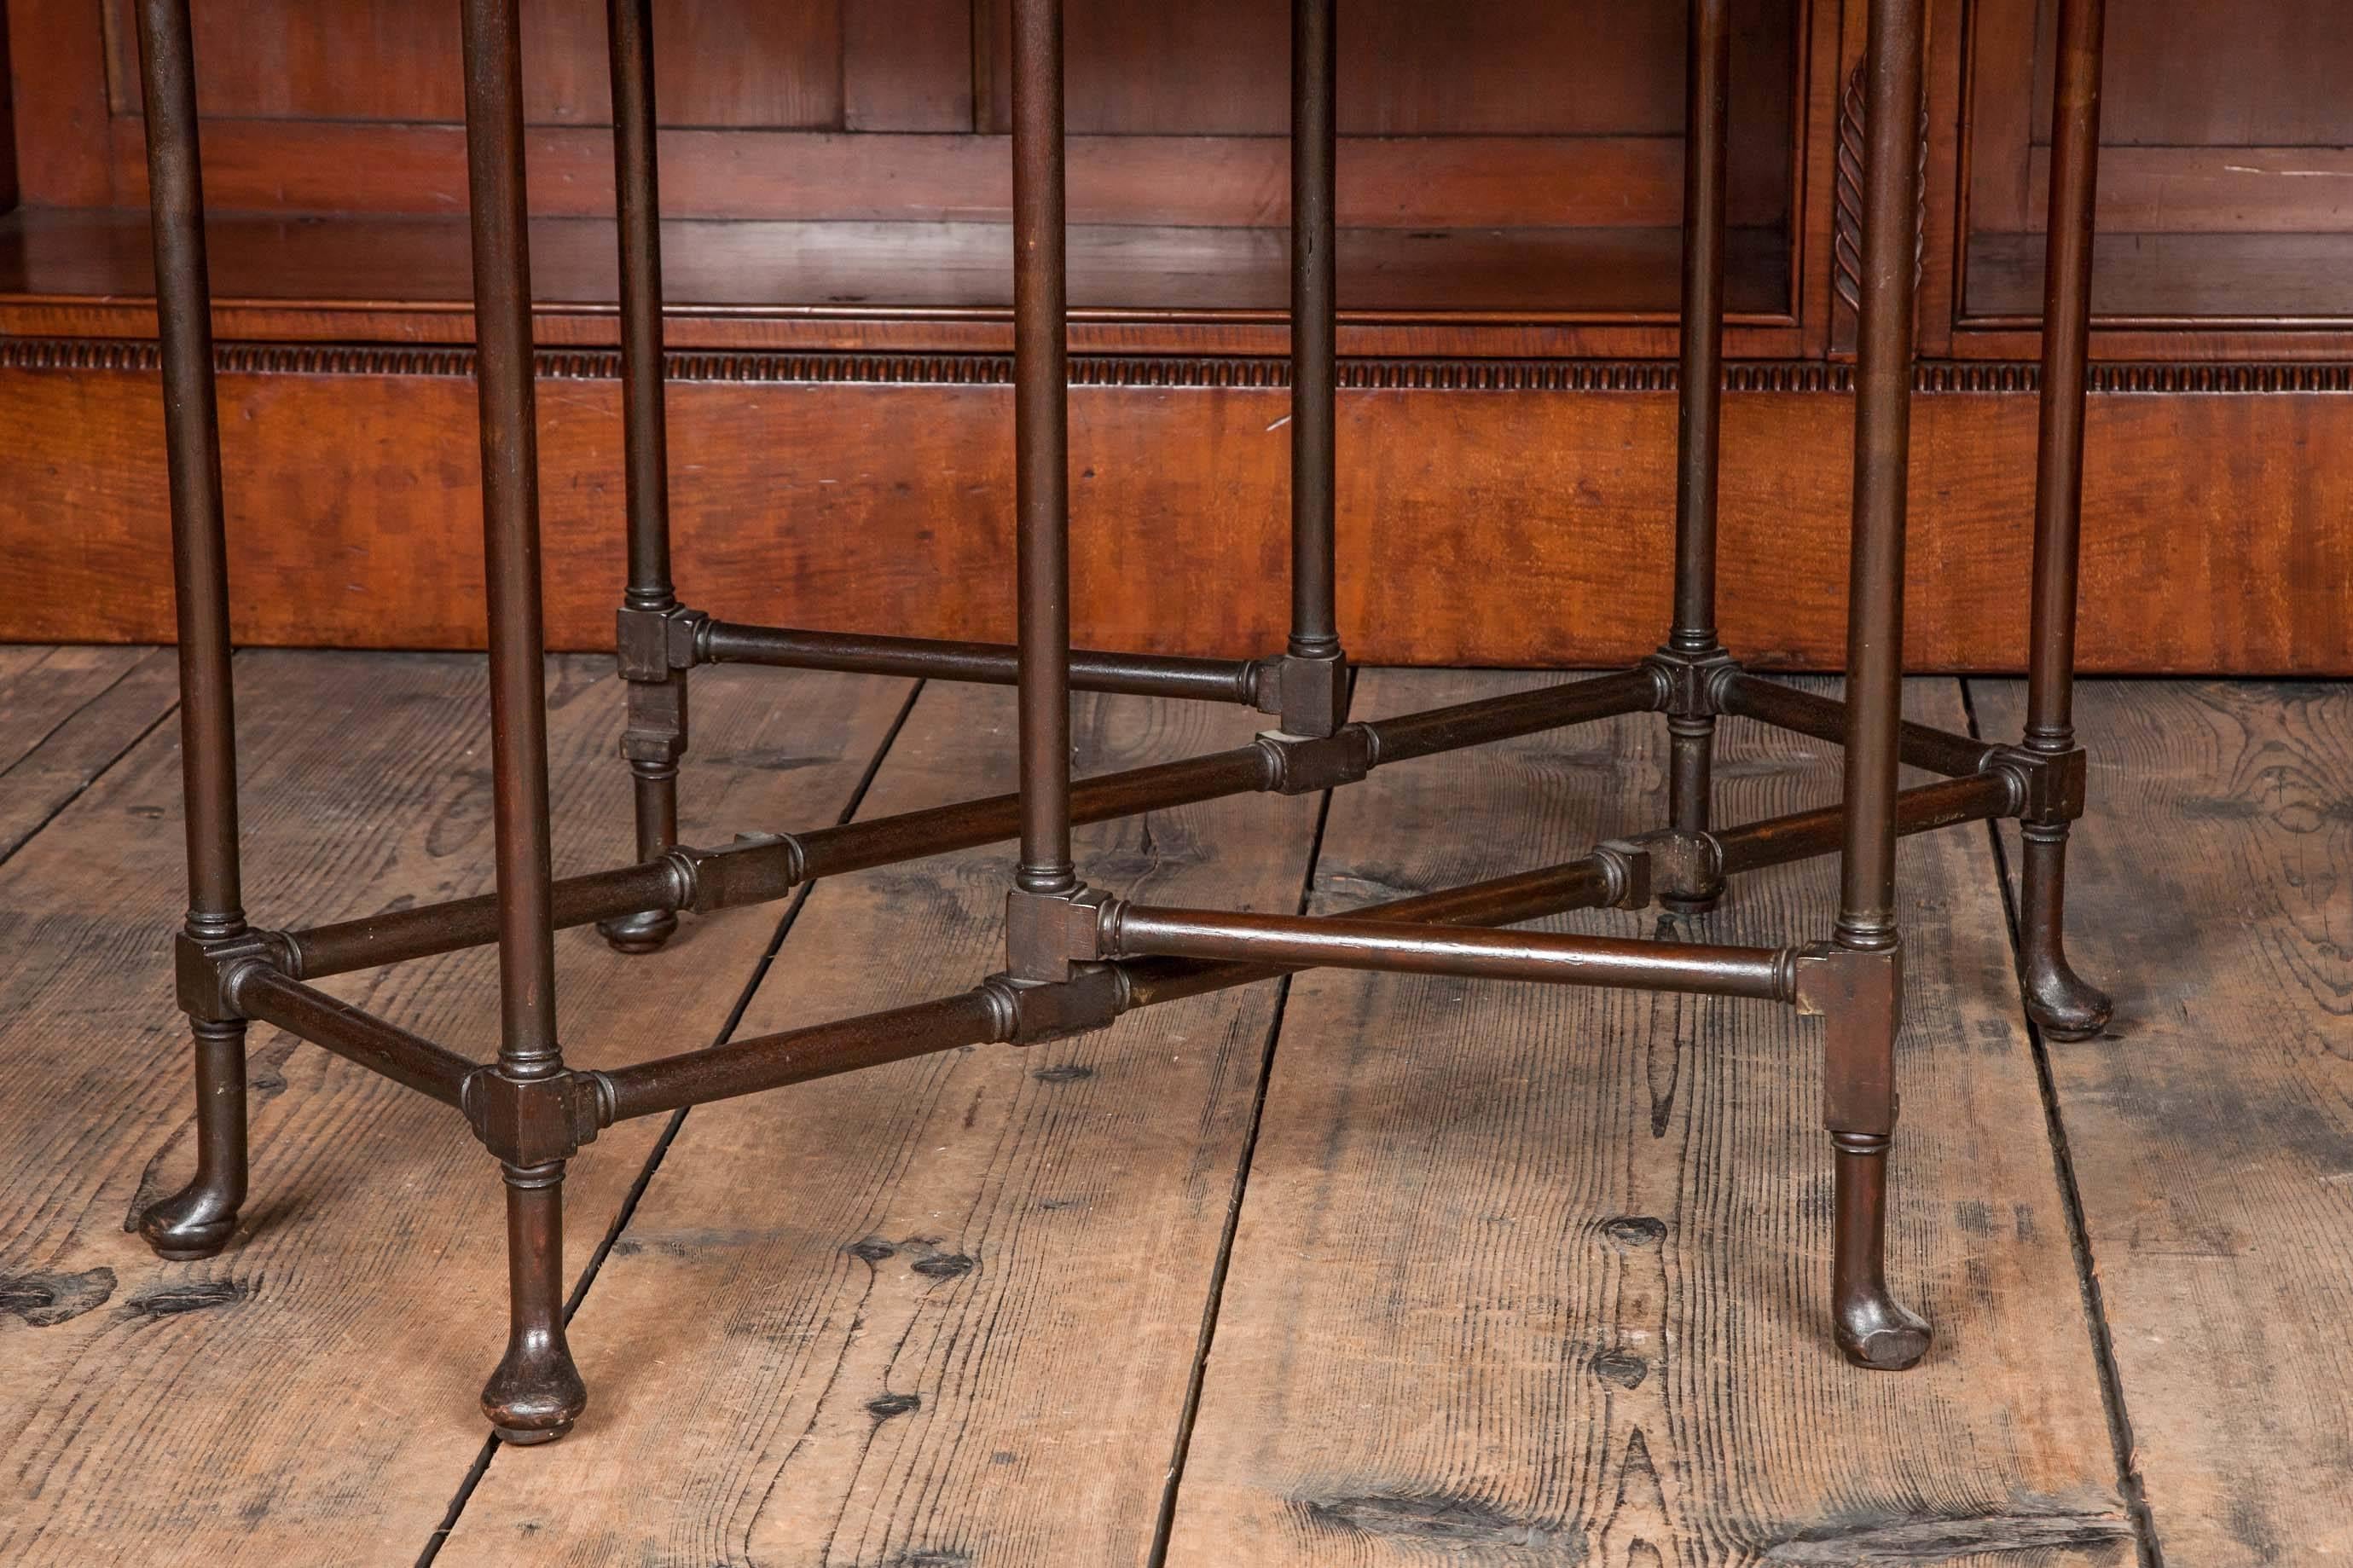 A George II mahogany spider leg drop-leaf table, with outstanding color and patination, English, circa 1750.